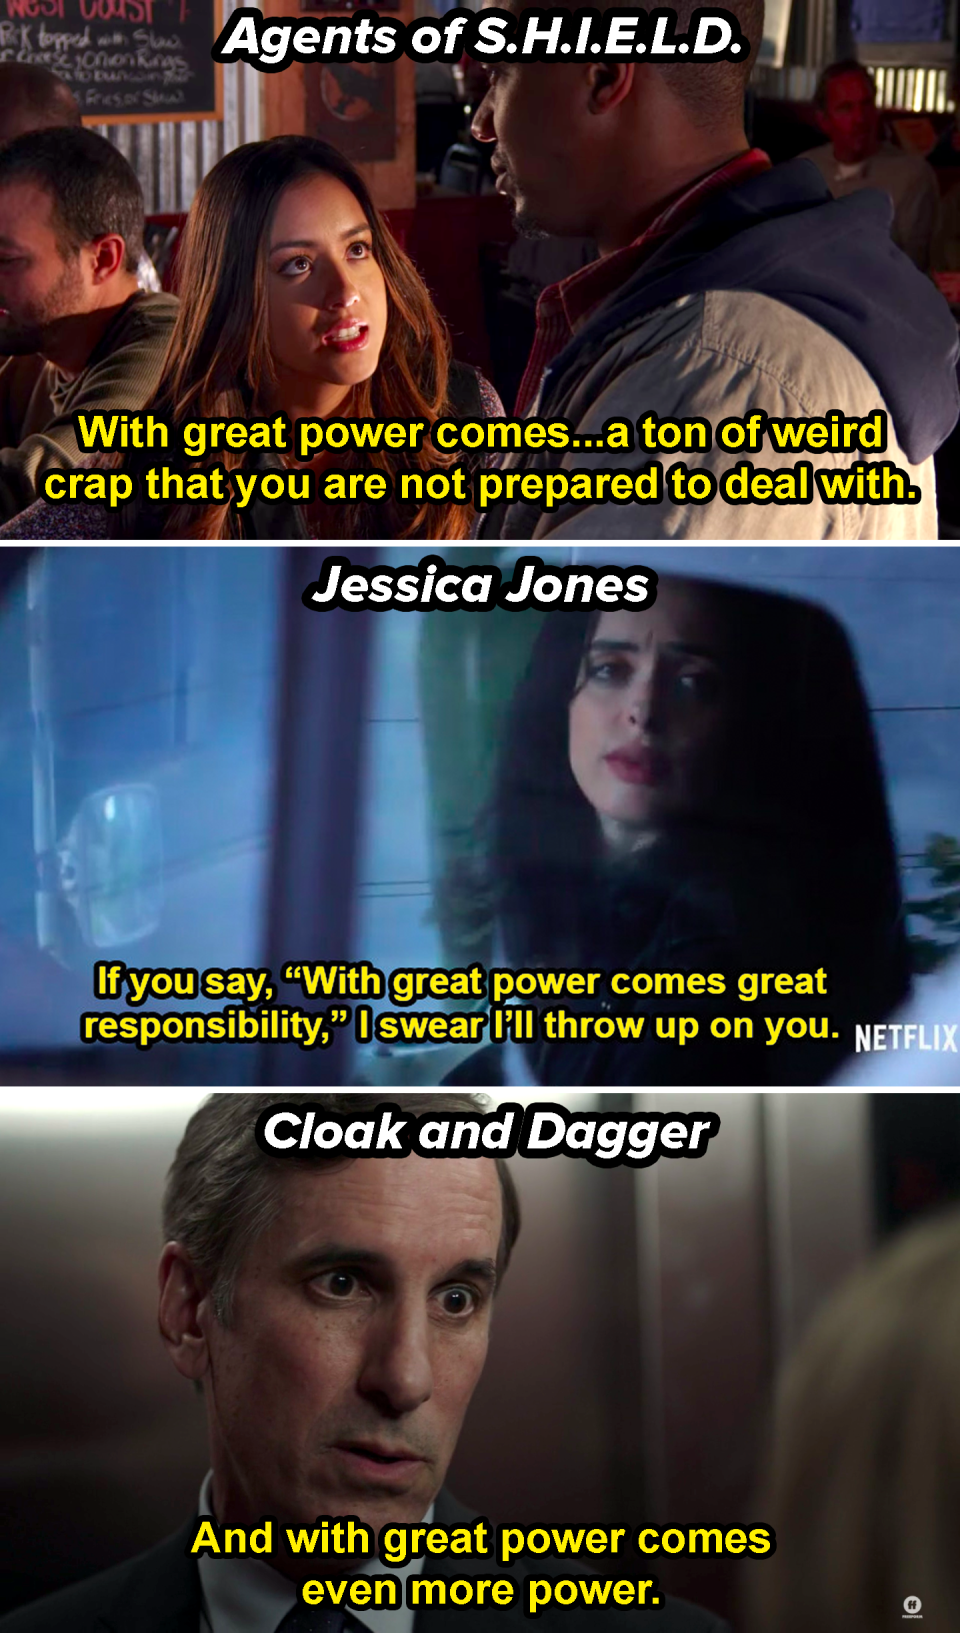 Agents of Shield: "With great power comes a ton of weird crap that you are not prepared to deal with," Jessica Jones: "If you say With great power, I'll throw up on you," and Cloak and Dagger: "With great power comes even more power"